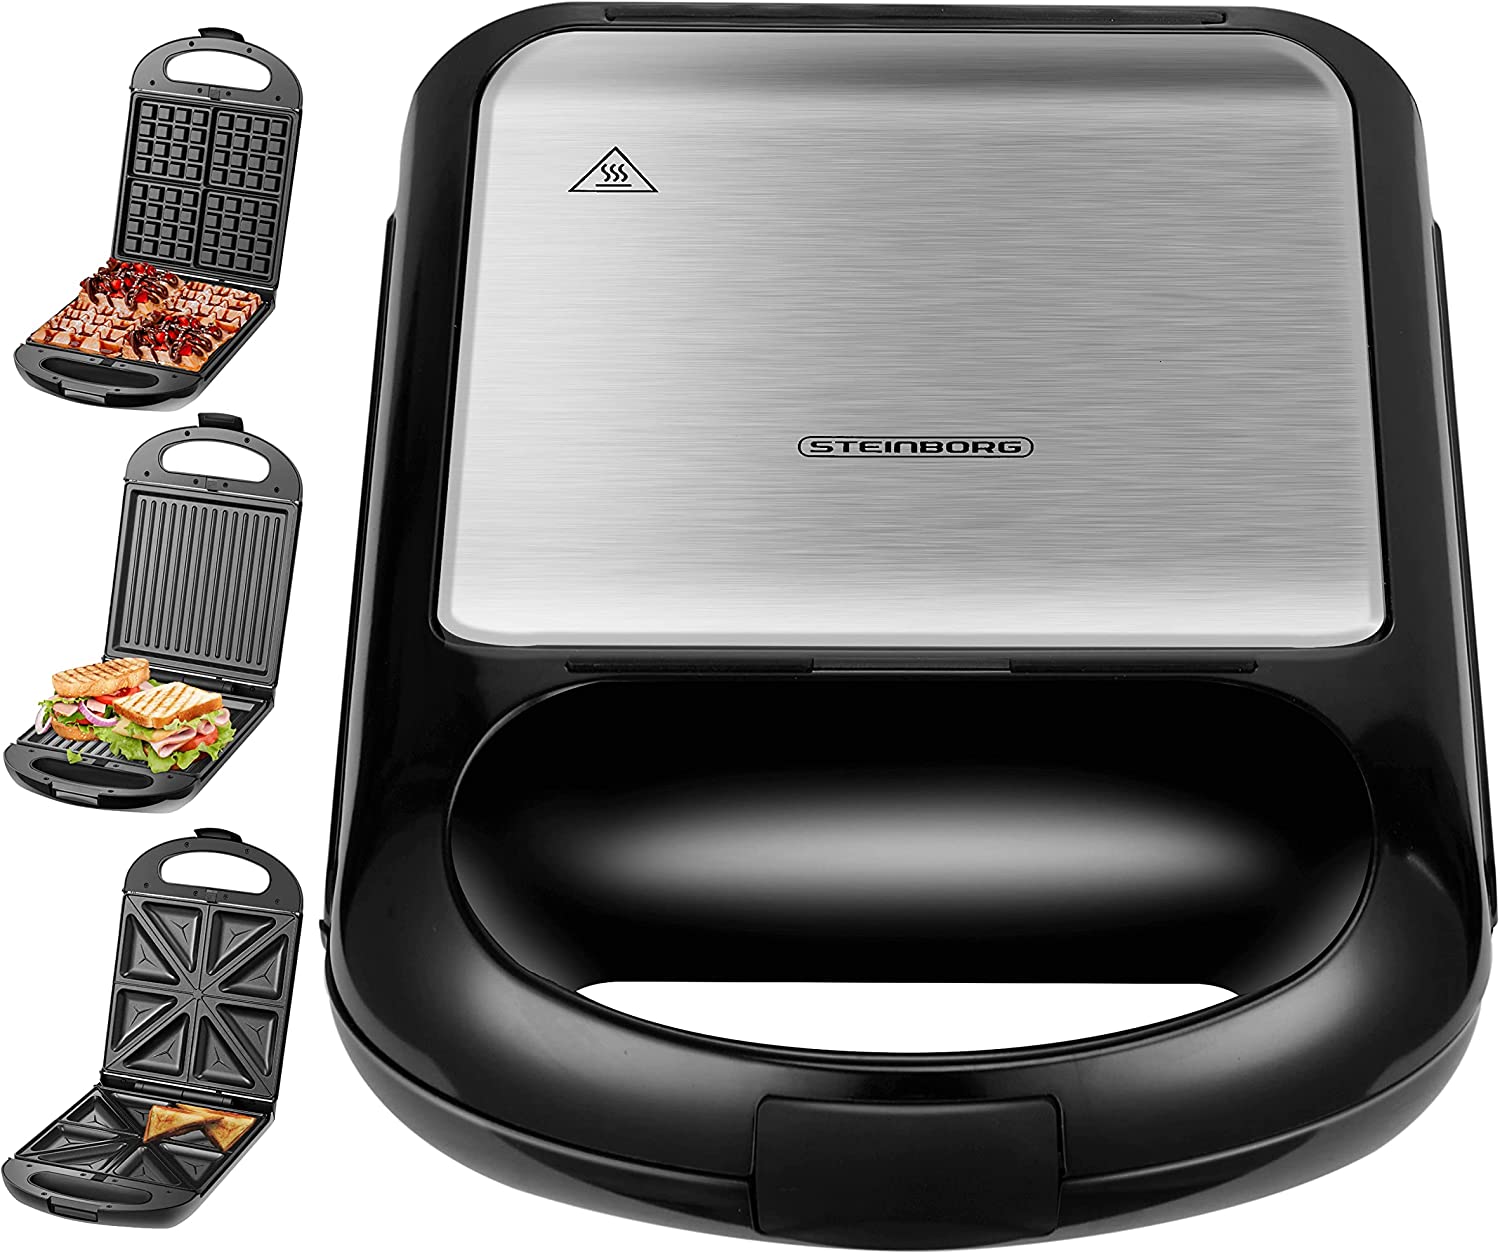 Steinborg 3-in-1 sandwich maker, 1200 watts, 3 interchangeable plates, waffle iron, contact grill, multi-grill, sandwich maker, waffle iron, electric grill